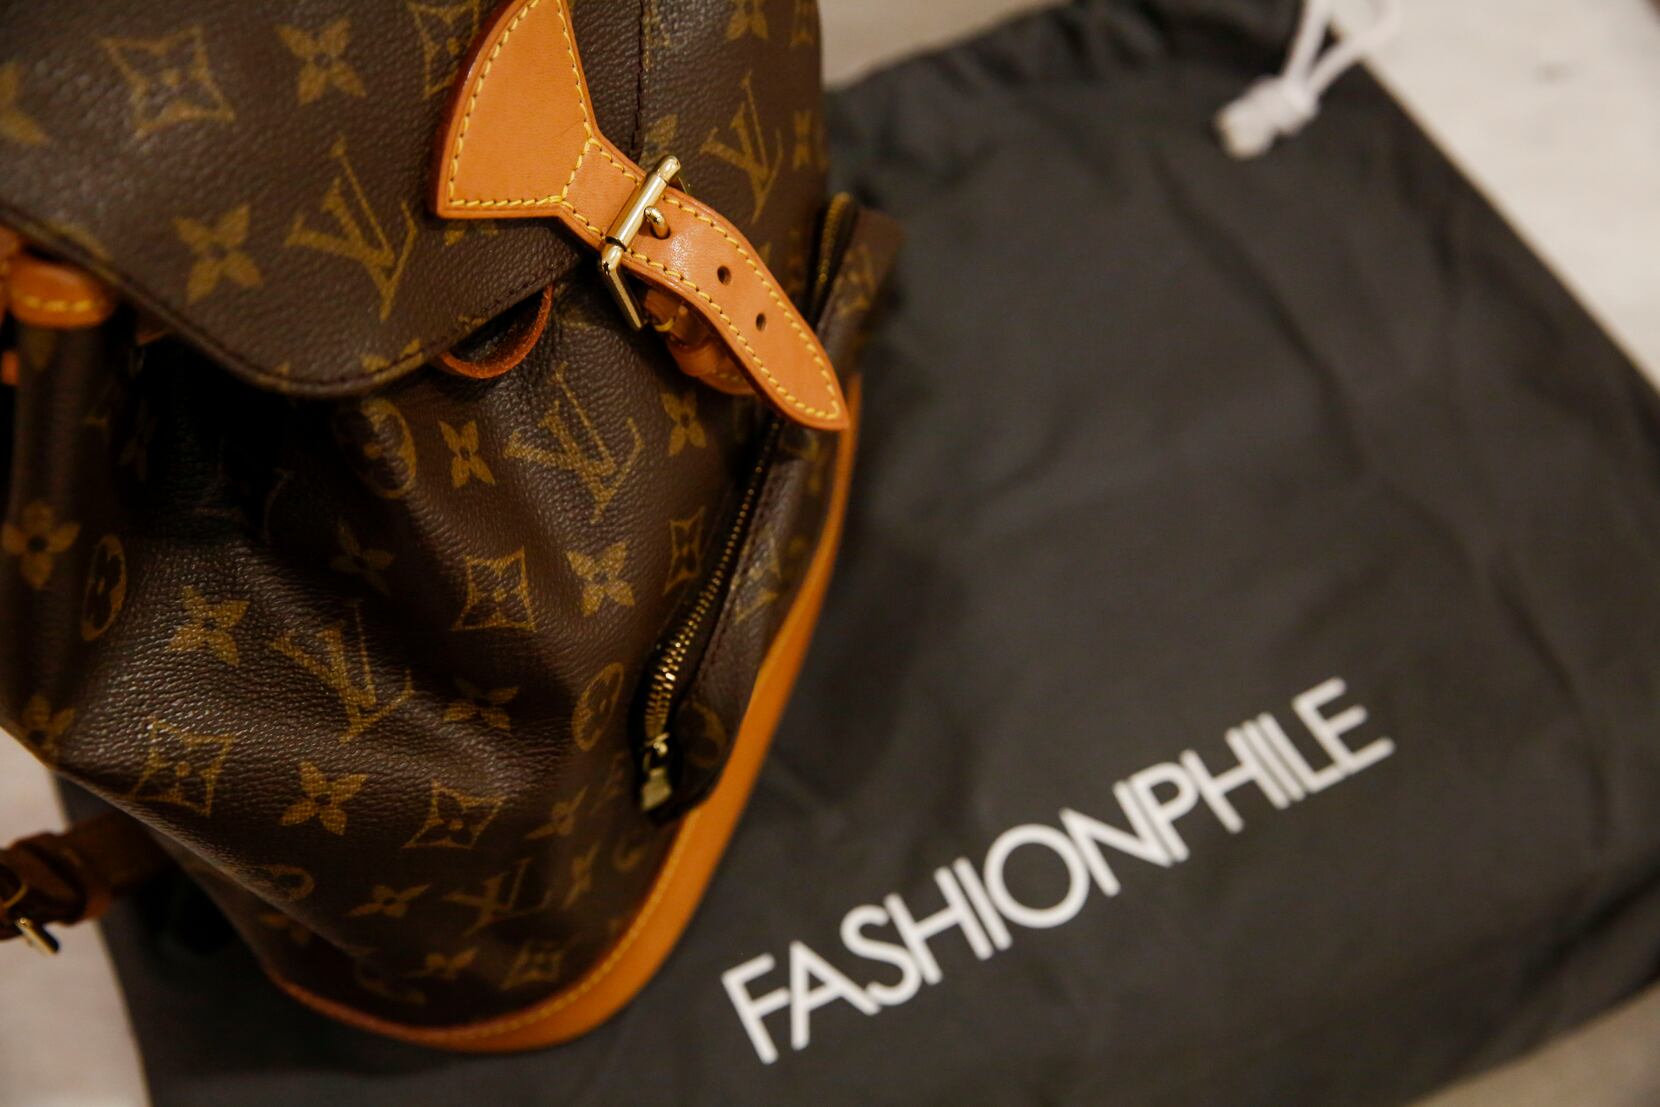 Louis Vuitton 'temporarily' stops selling Supreme collection